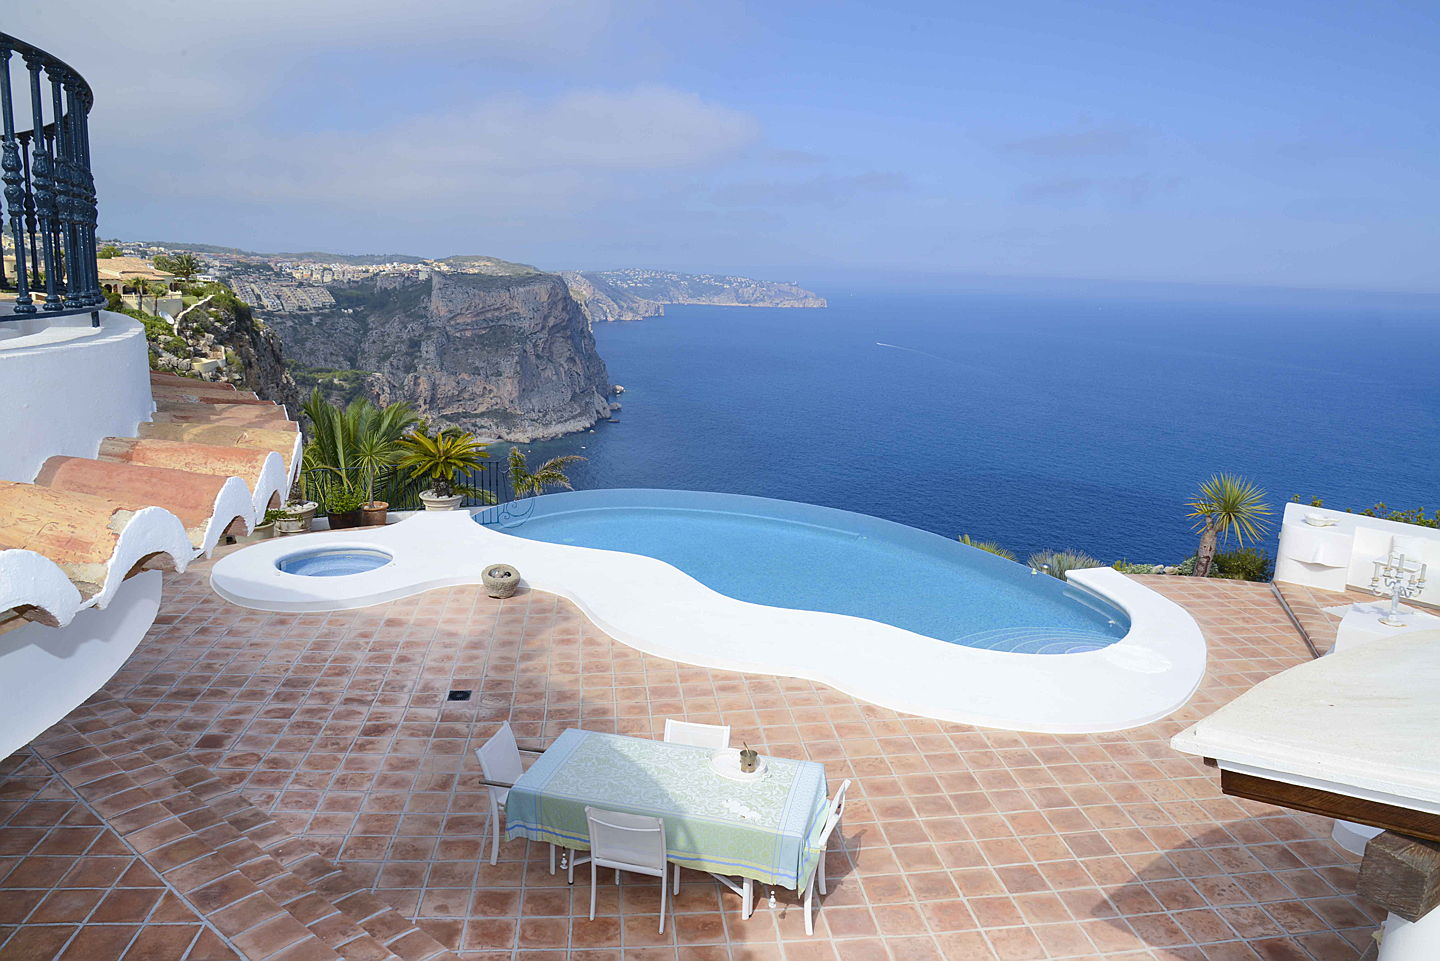  Moraira, Costa Blanca
- This unique villa, the cliff, is situated on the very edge of the coast line with absolutely stunning views. The elegant and luminous luxury villa welcomes us with the mediterranean light flooding in, and from the very entrance you understand that this house is something really special